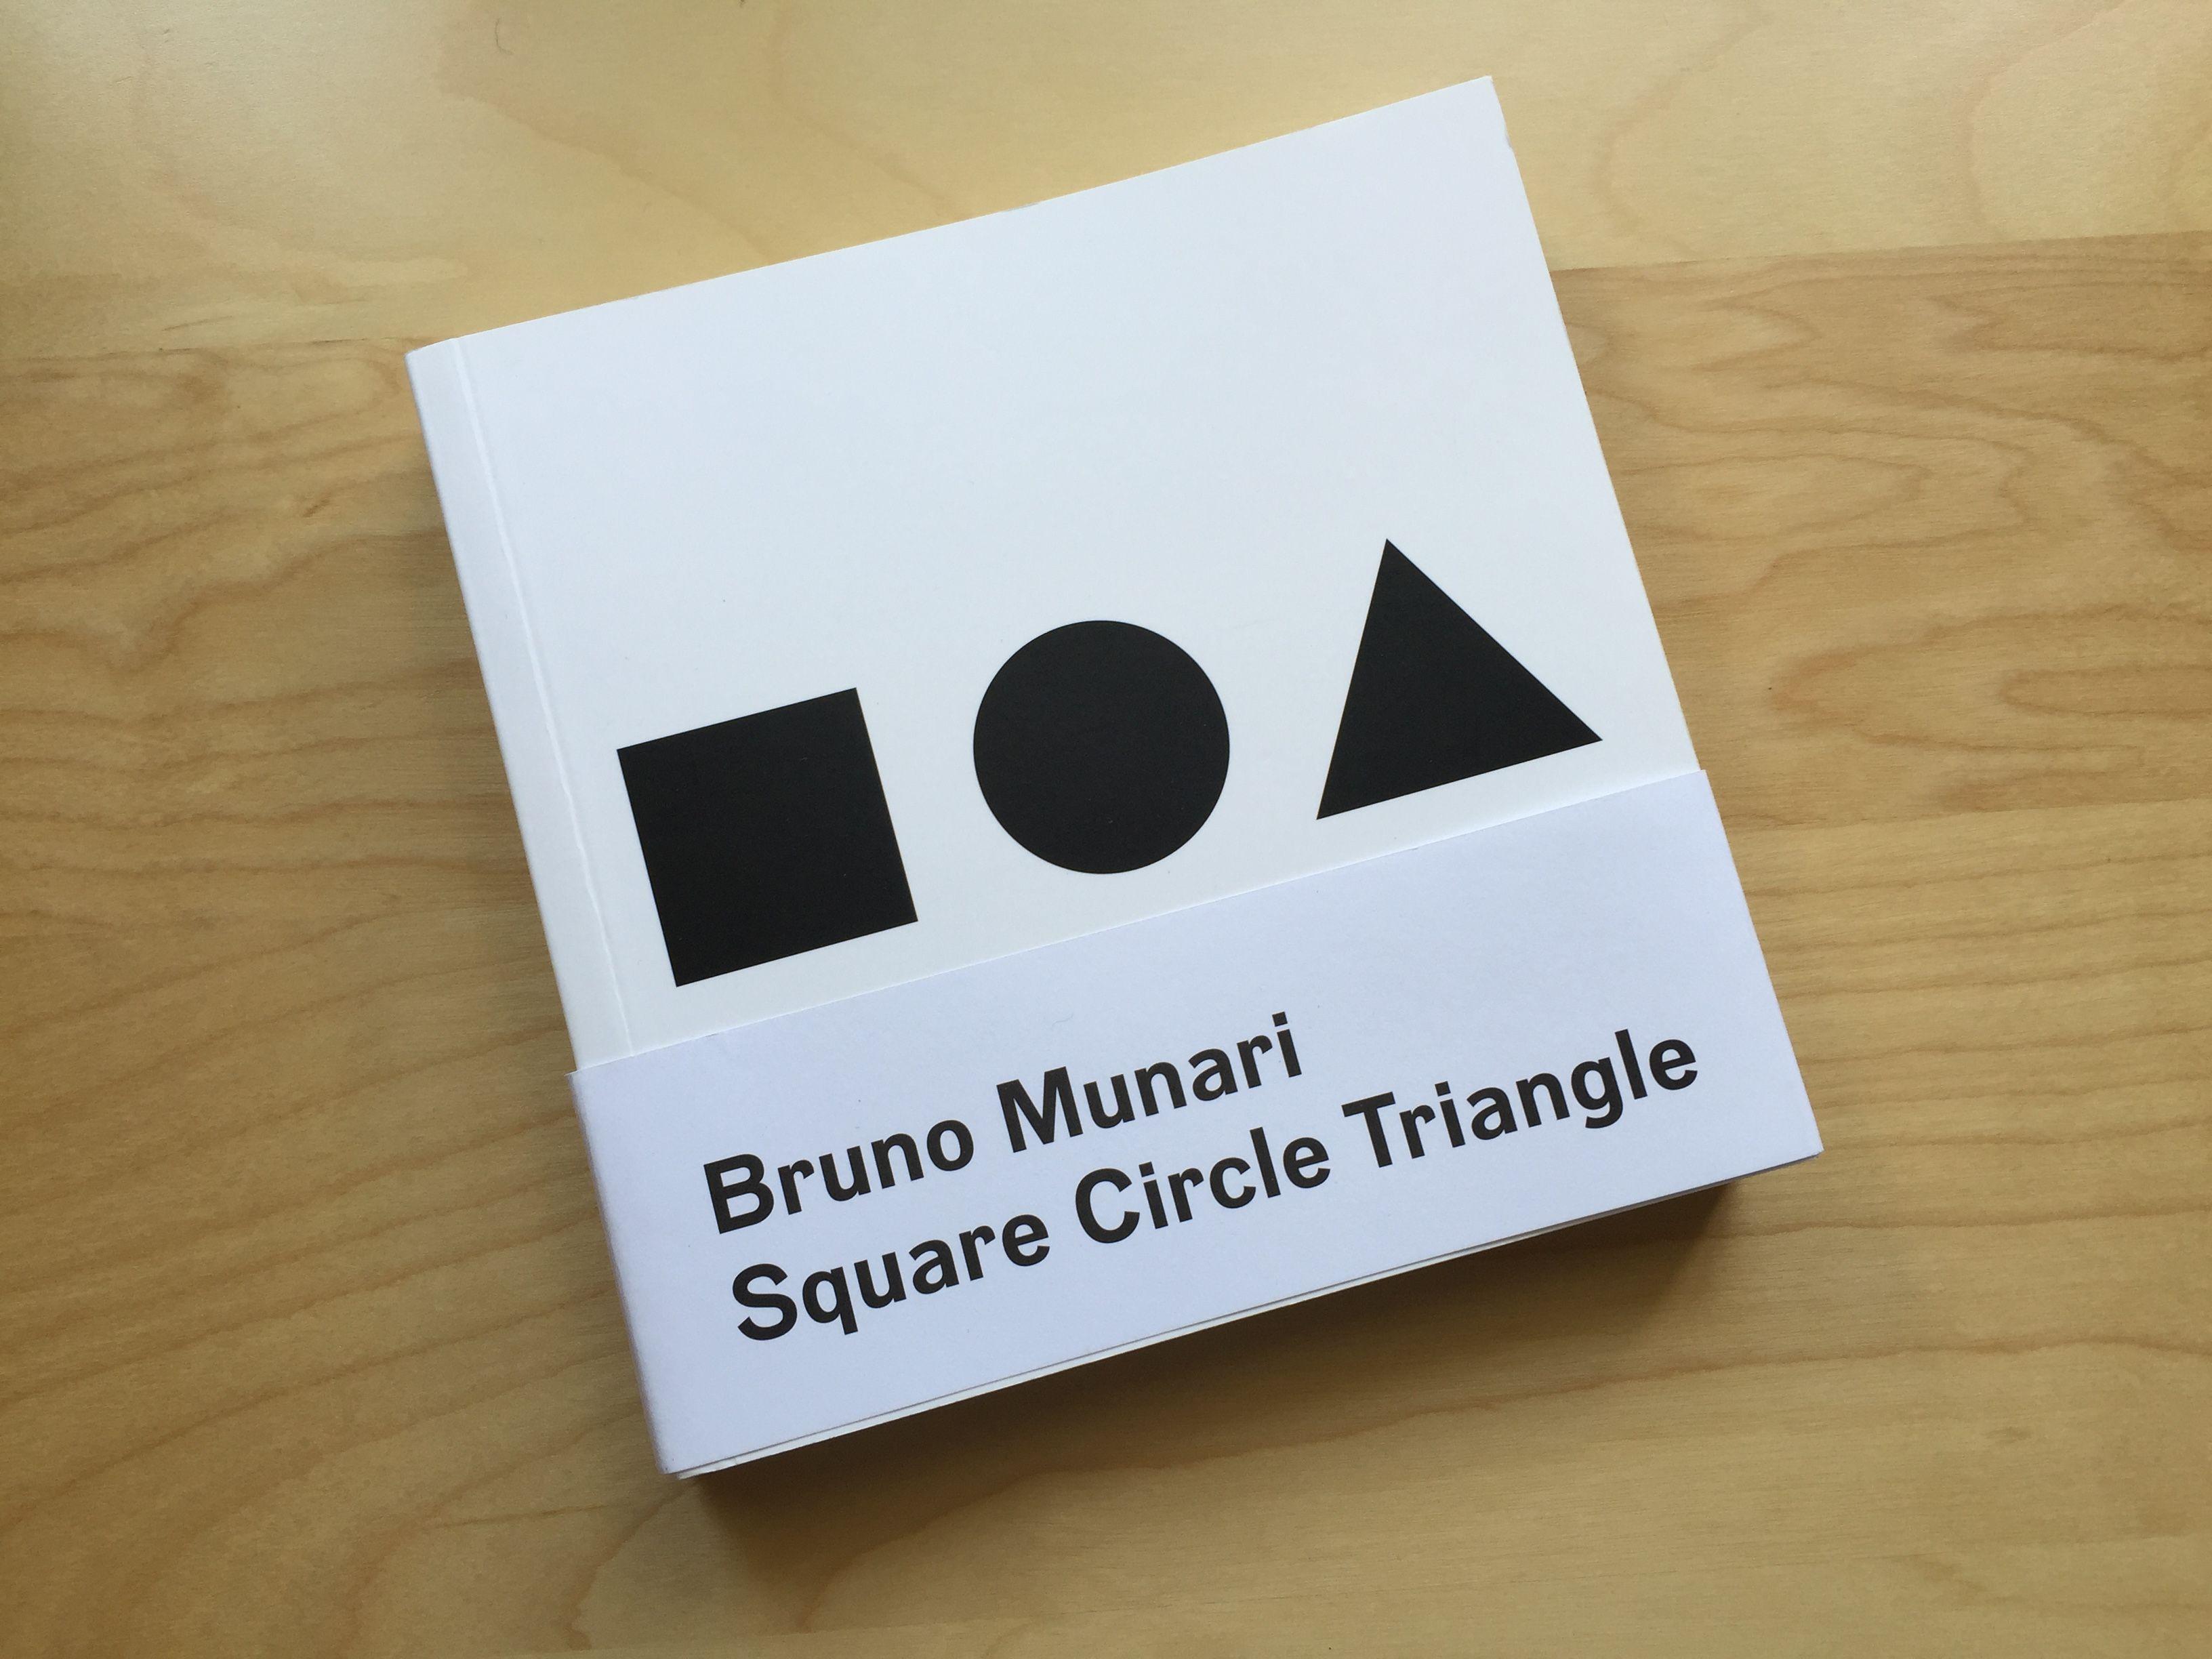 Square with Triangle Logo - Square Circle Triangle by Bruno Munari - Fonts In Use